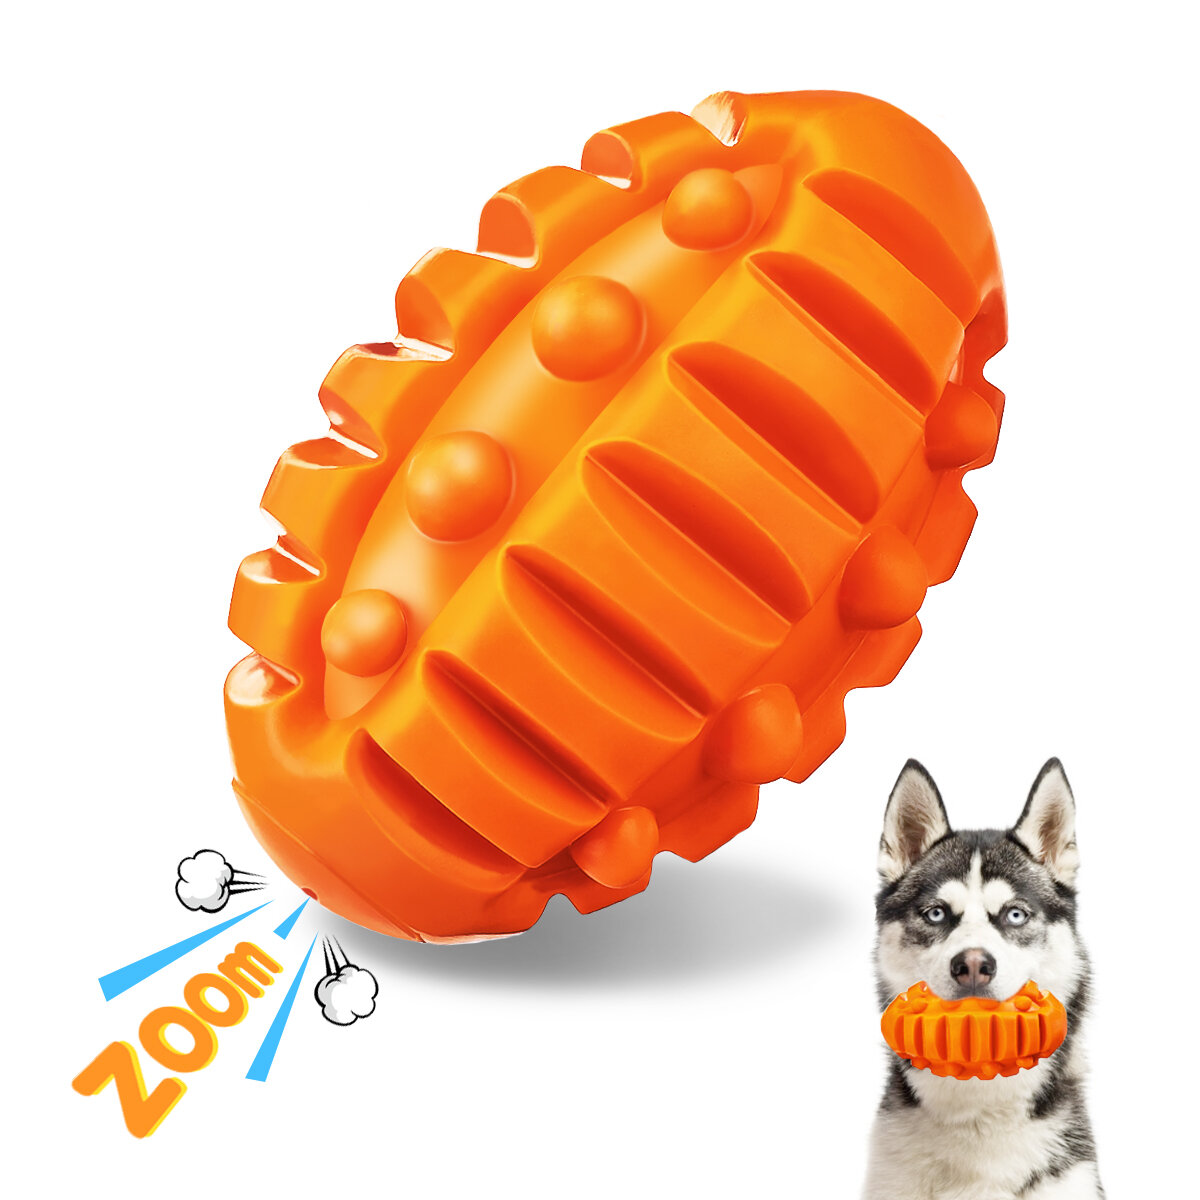 Focuspet 5"x 3" Large Interactive Dog Ball Toys, Real Beef Flavor, Squeaky Chew Toy for Medium Large